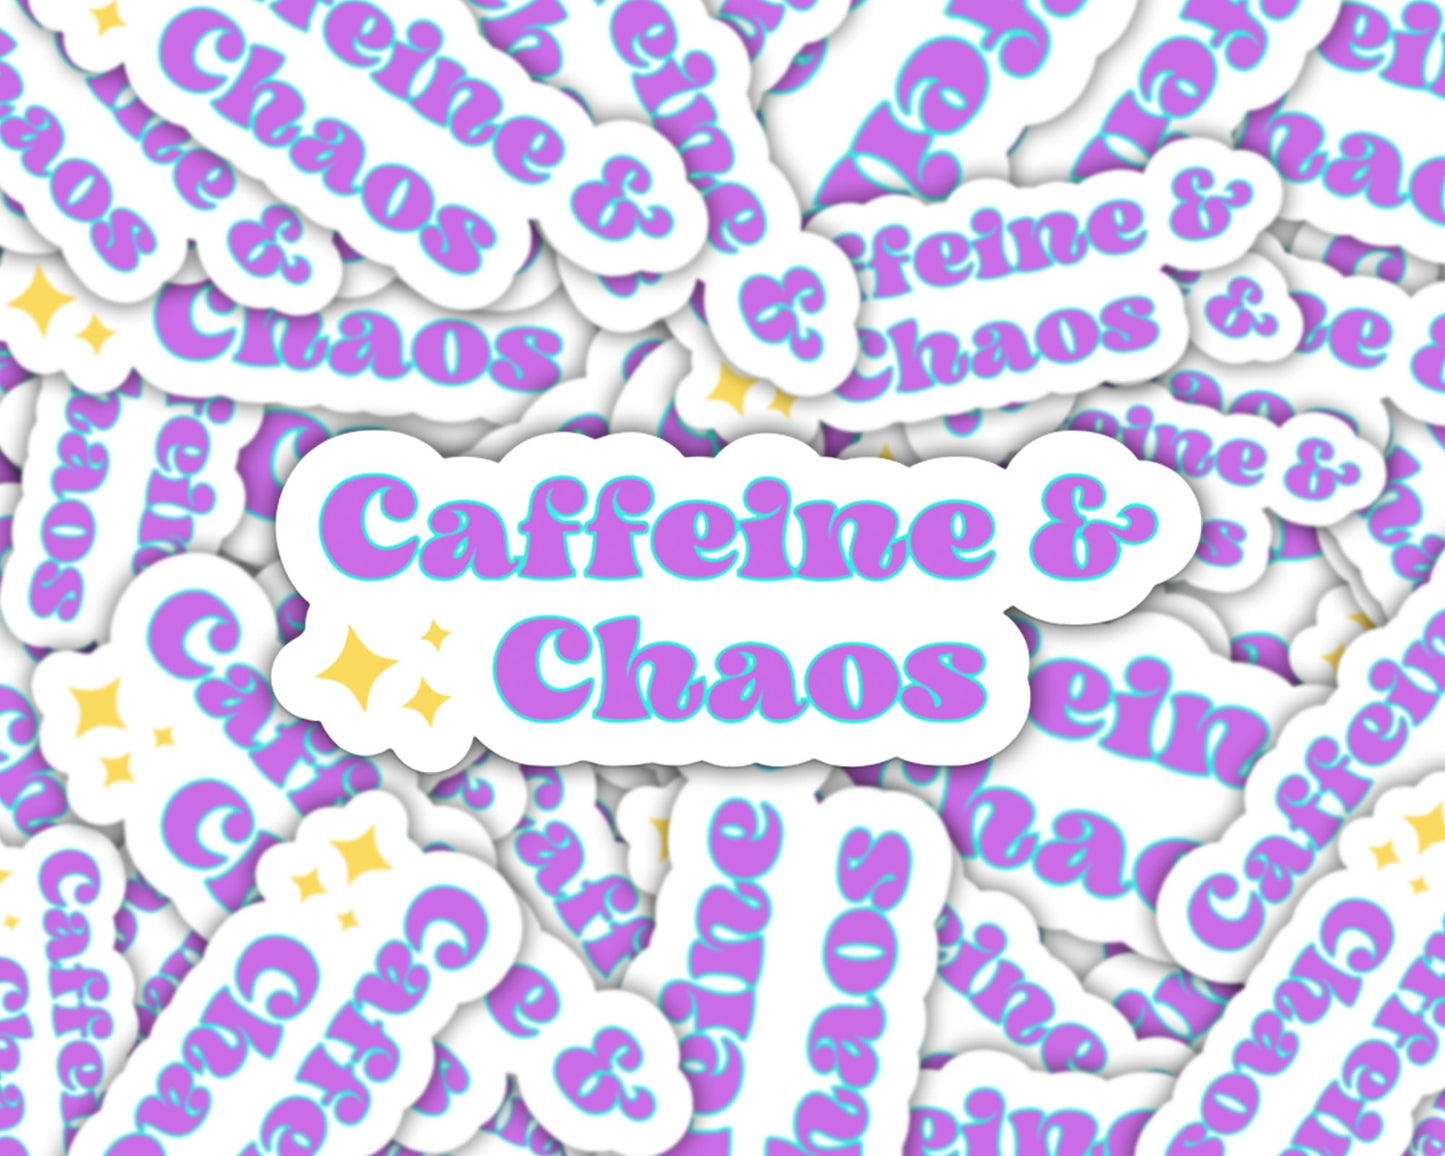 caffeine and chaos sticker, coffee sticker, stickers for moms, coffee lover, chaos coordinator, for laptop, for water bottle, coffee cup